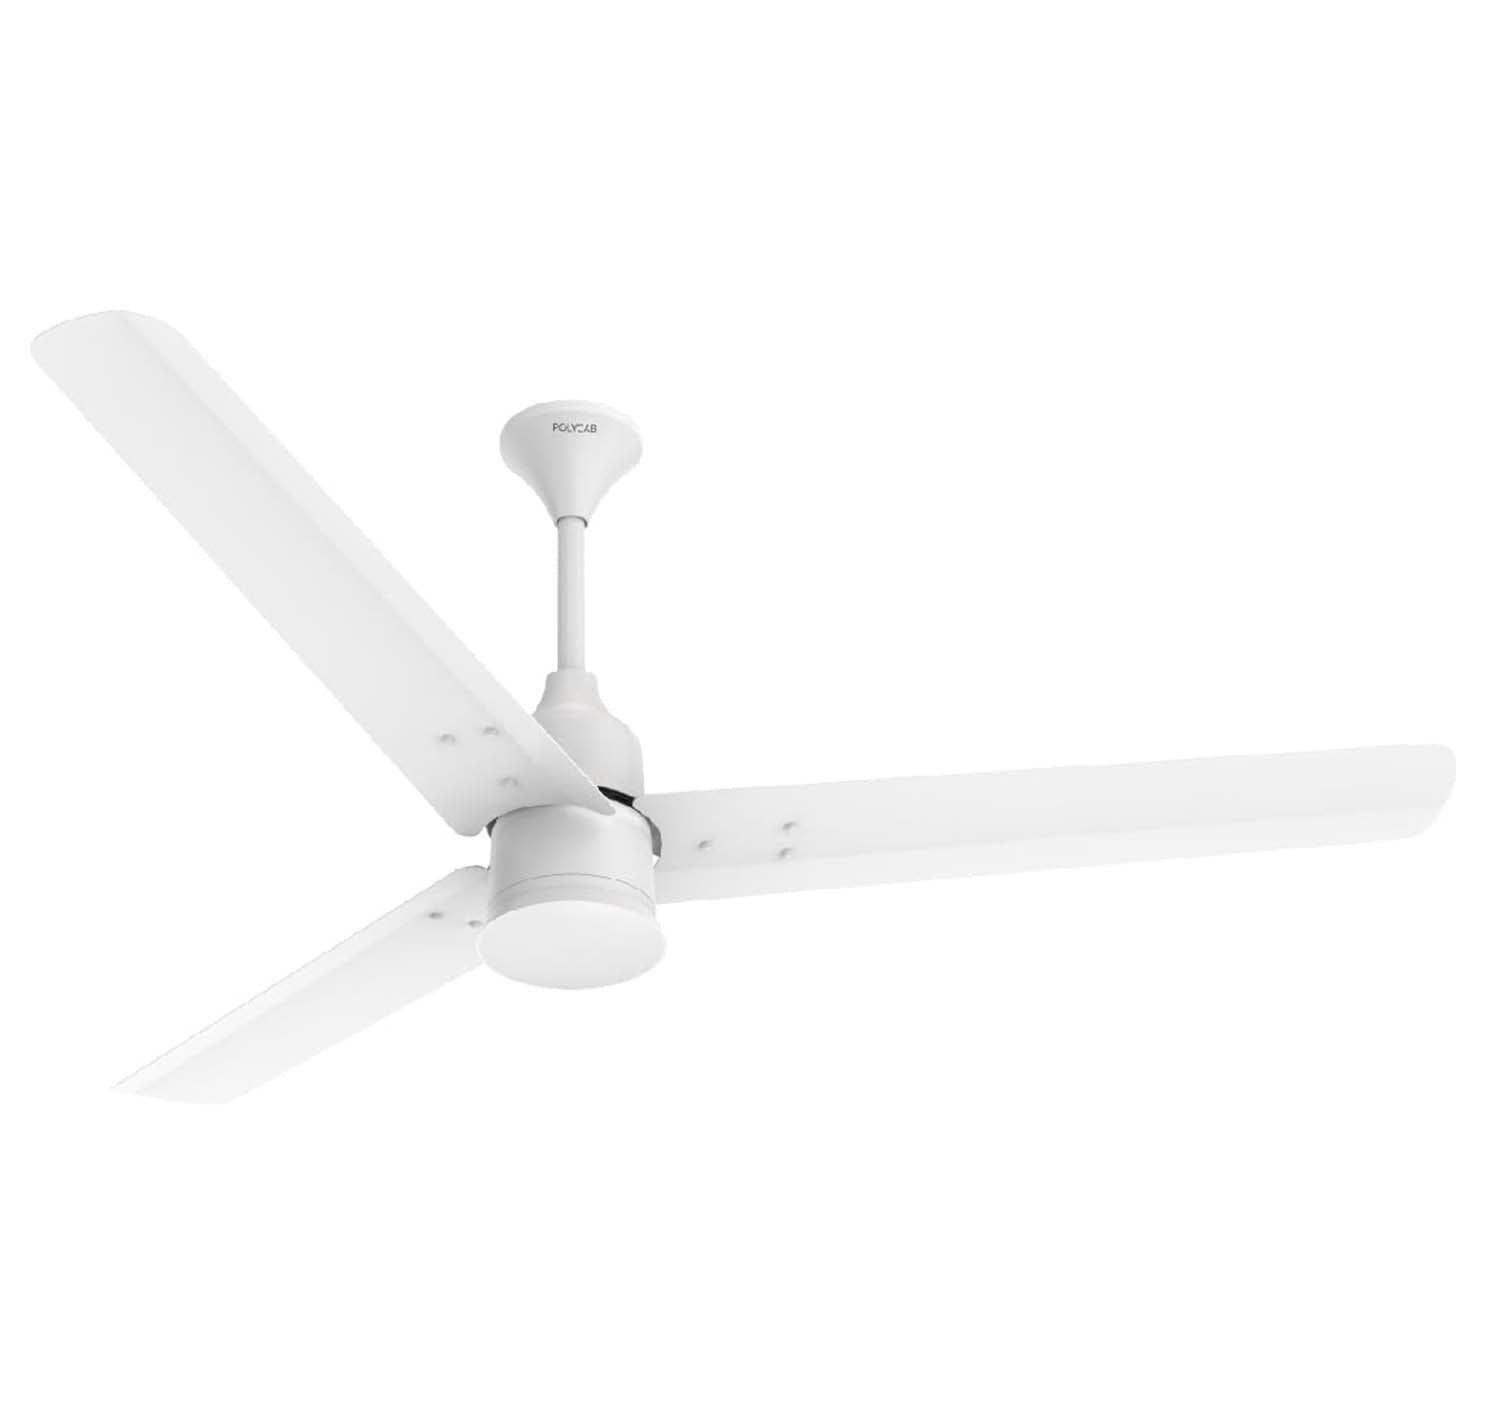 Polycab Silenco Advance BLDC Mini Ceiling Fan With 5 Star Rated - 1200mm - Matt Satin White